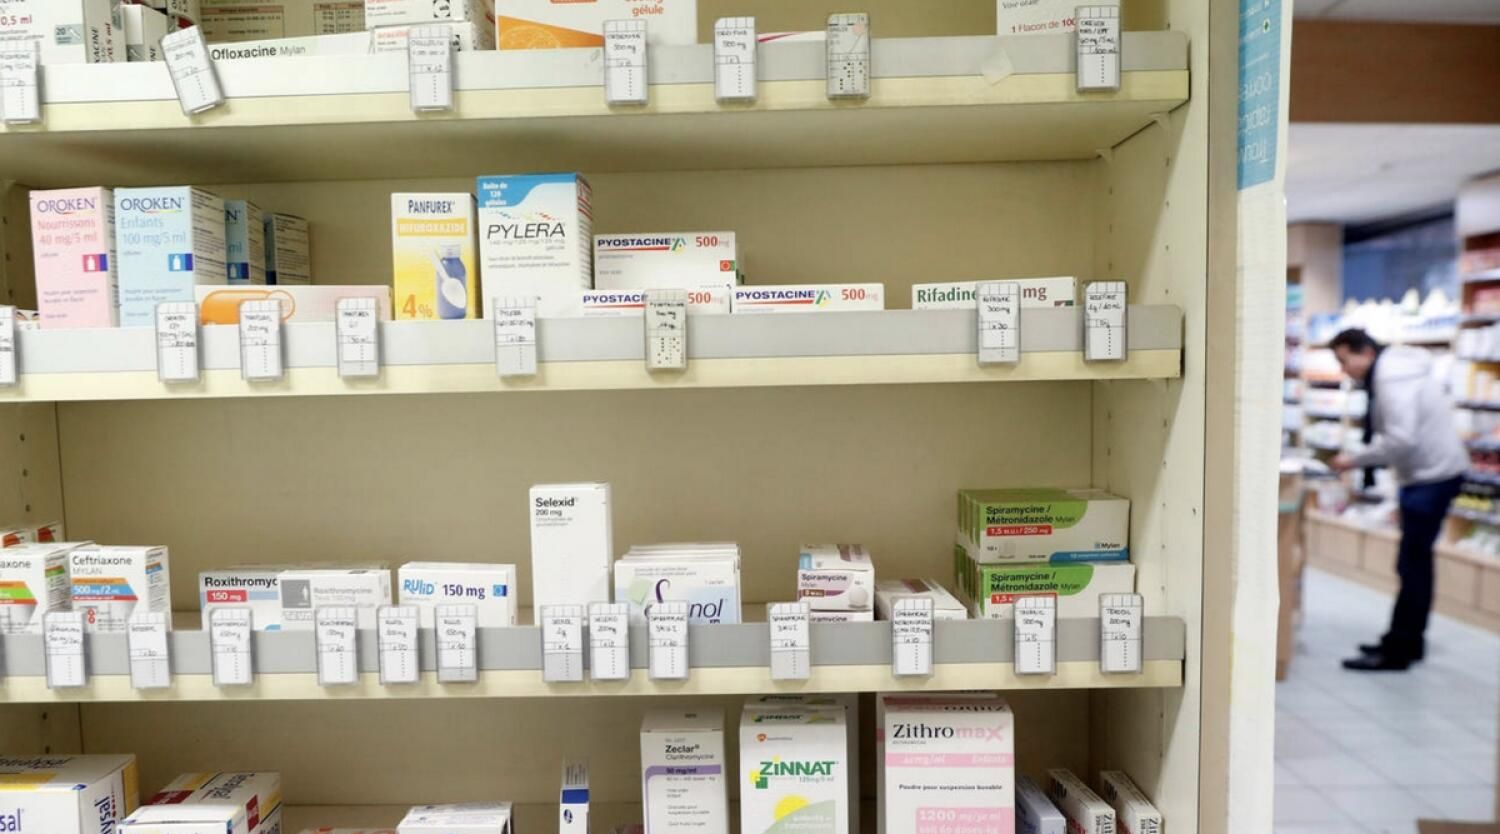 UAE: Over 9 initiatives since 2011 to reduce medicine prices in pharmacies